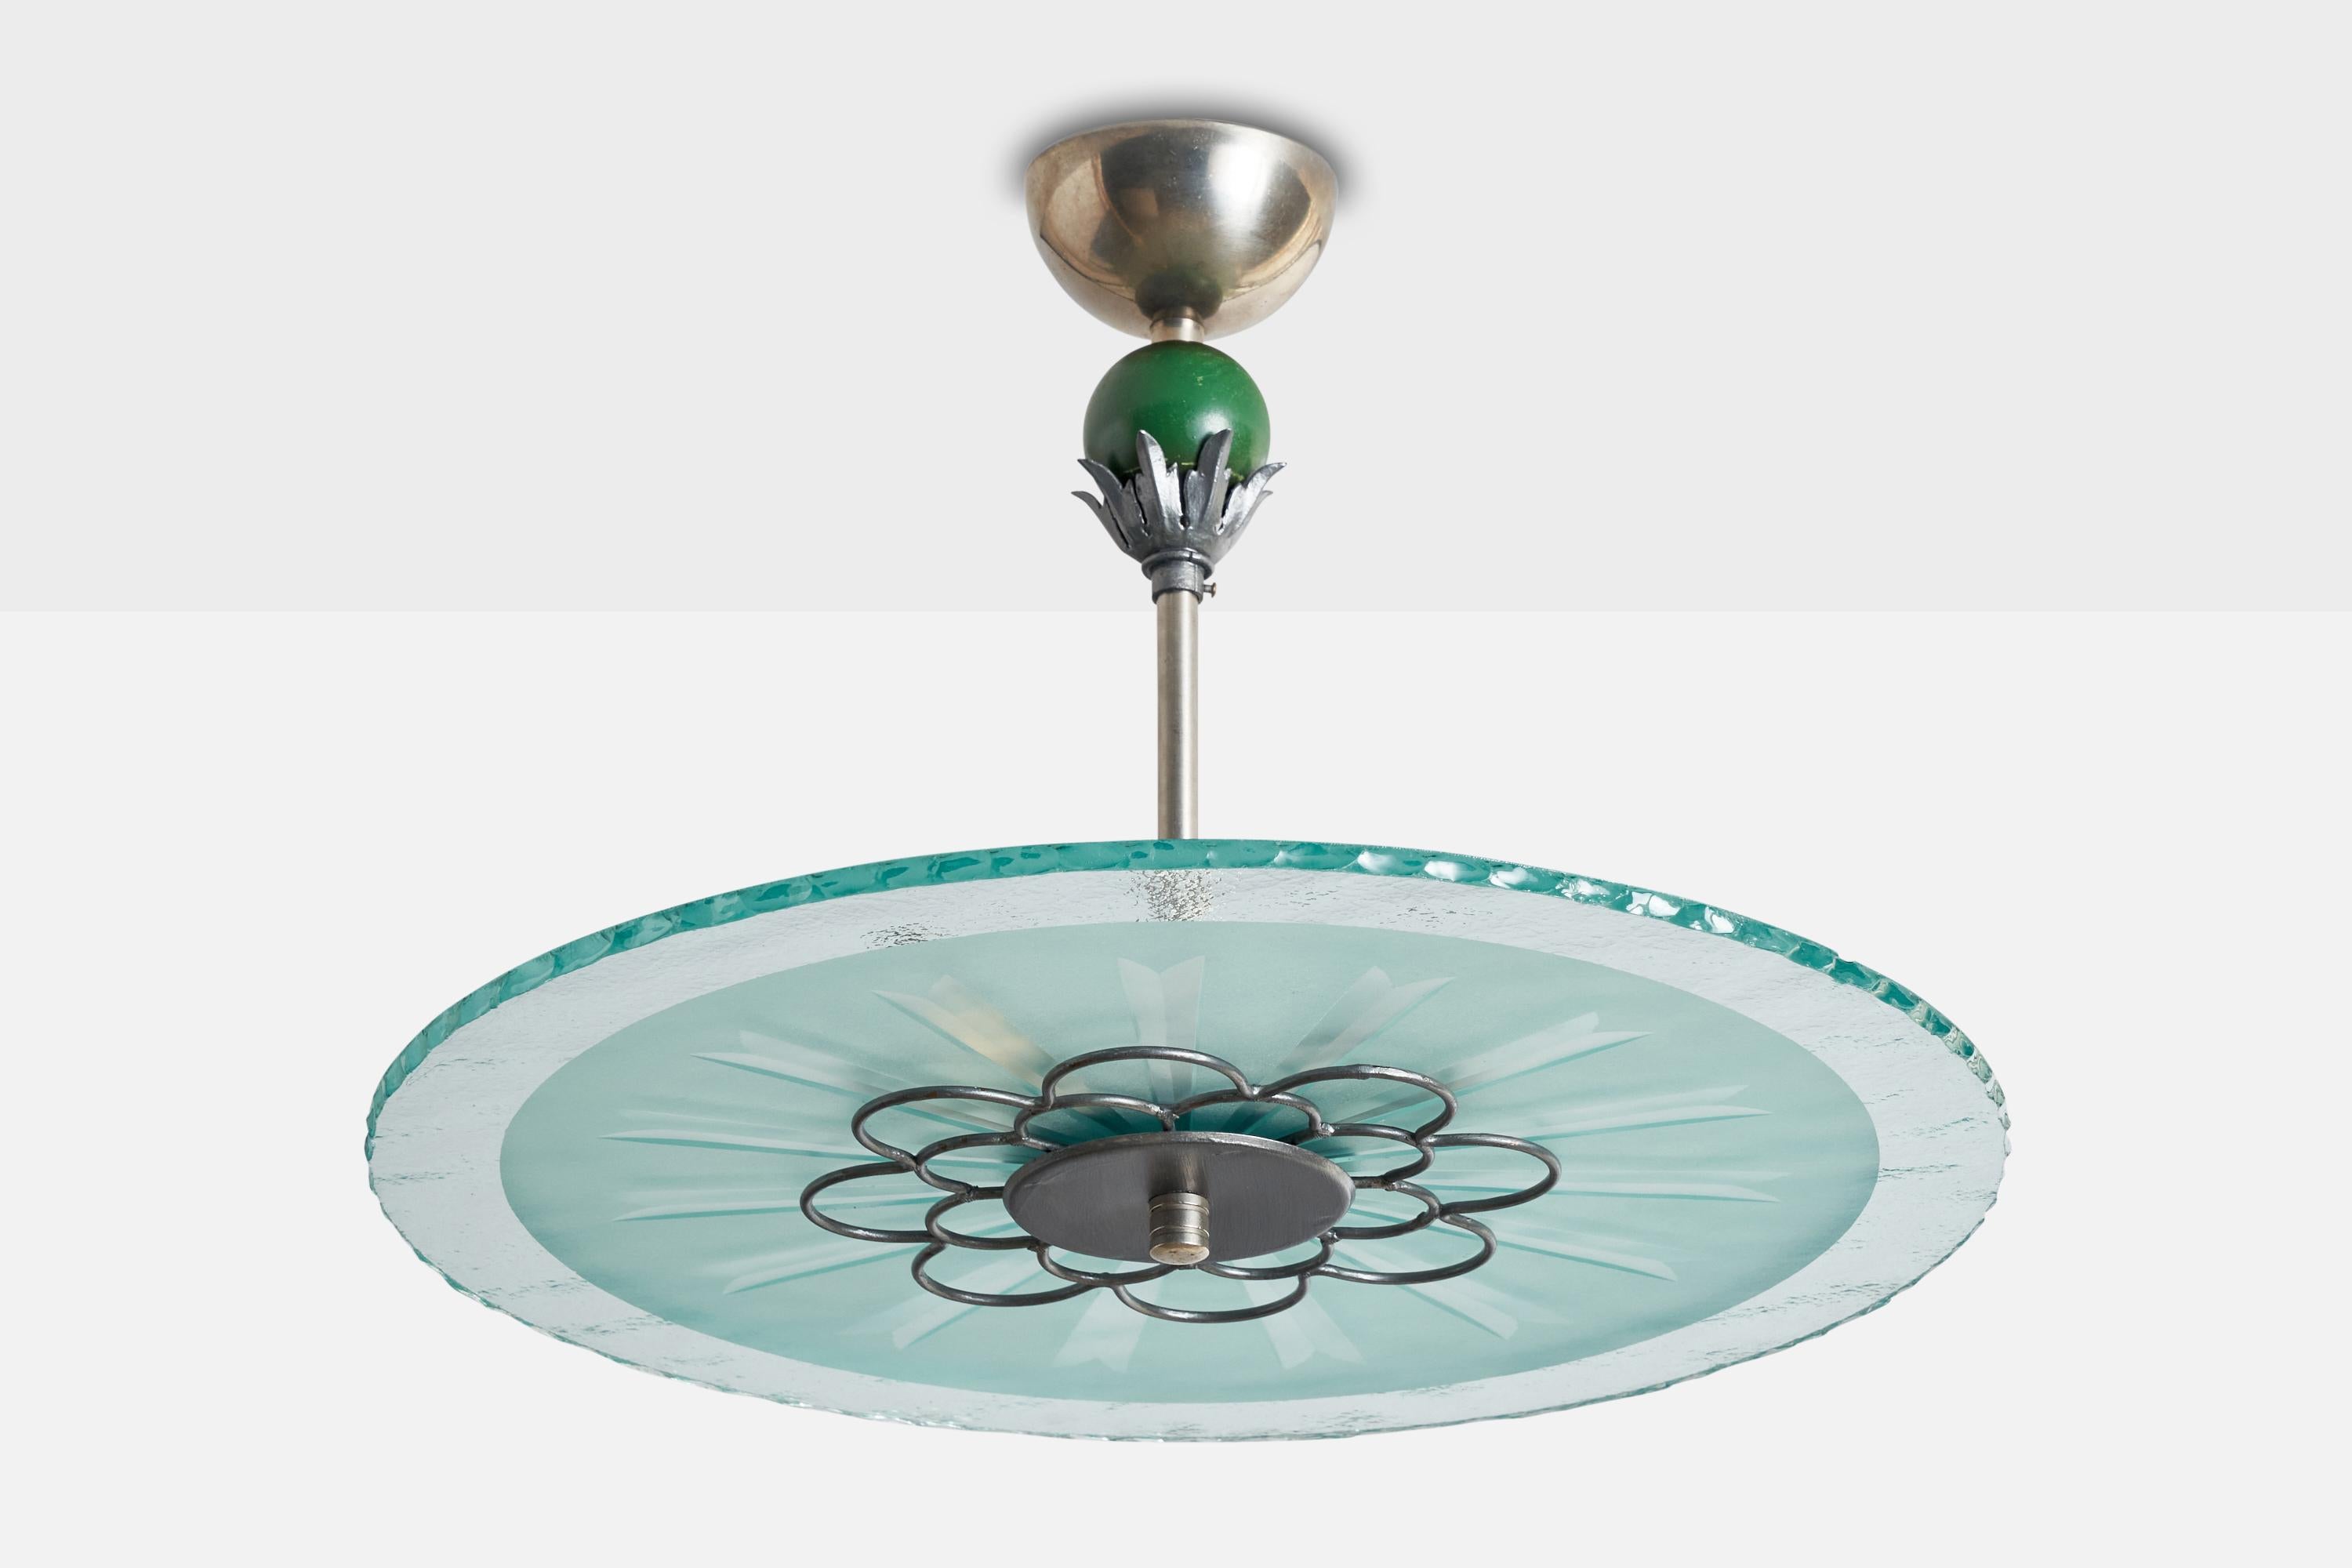 A glass, metal, pewter and green-lacquered wood pendant light designed and produced in Sweden, 1930s.

Dimensions of canopy (inches): 2”  H x 3.75” Diameter
Socket takes standard E-26 bulbs. 3 sockets.There is no maximum wattage stated on the